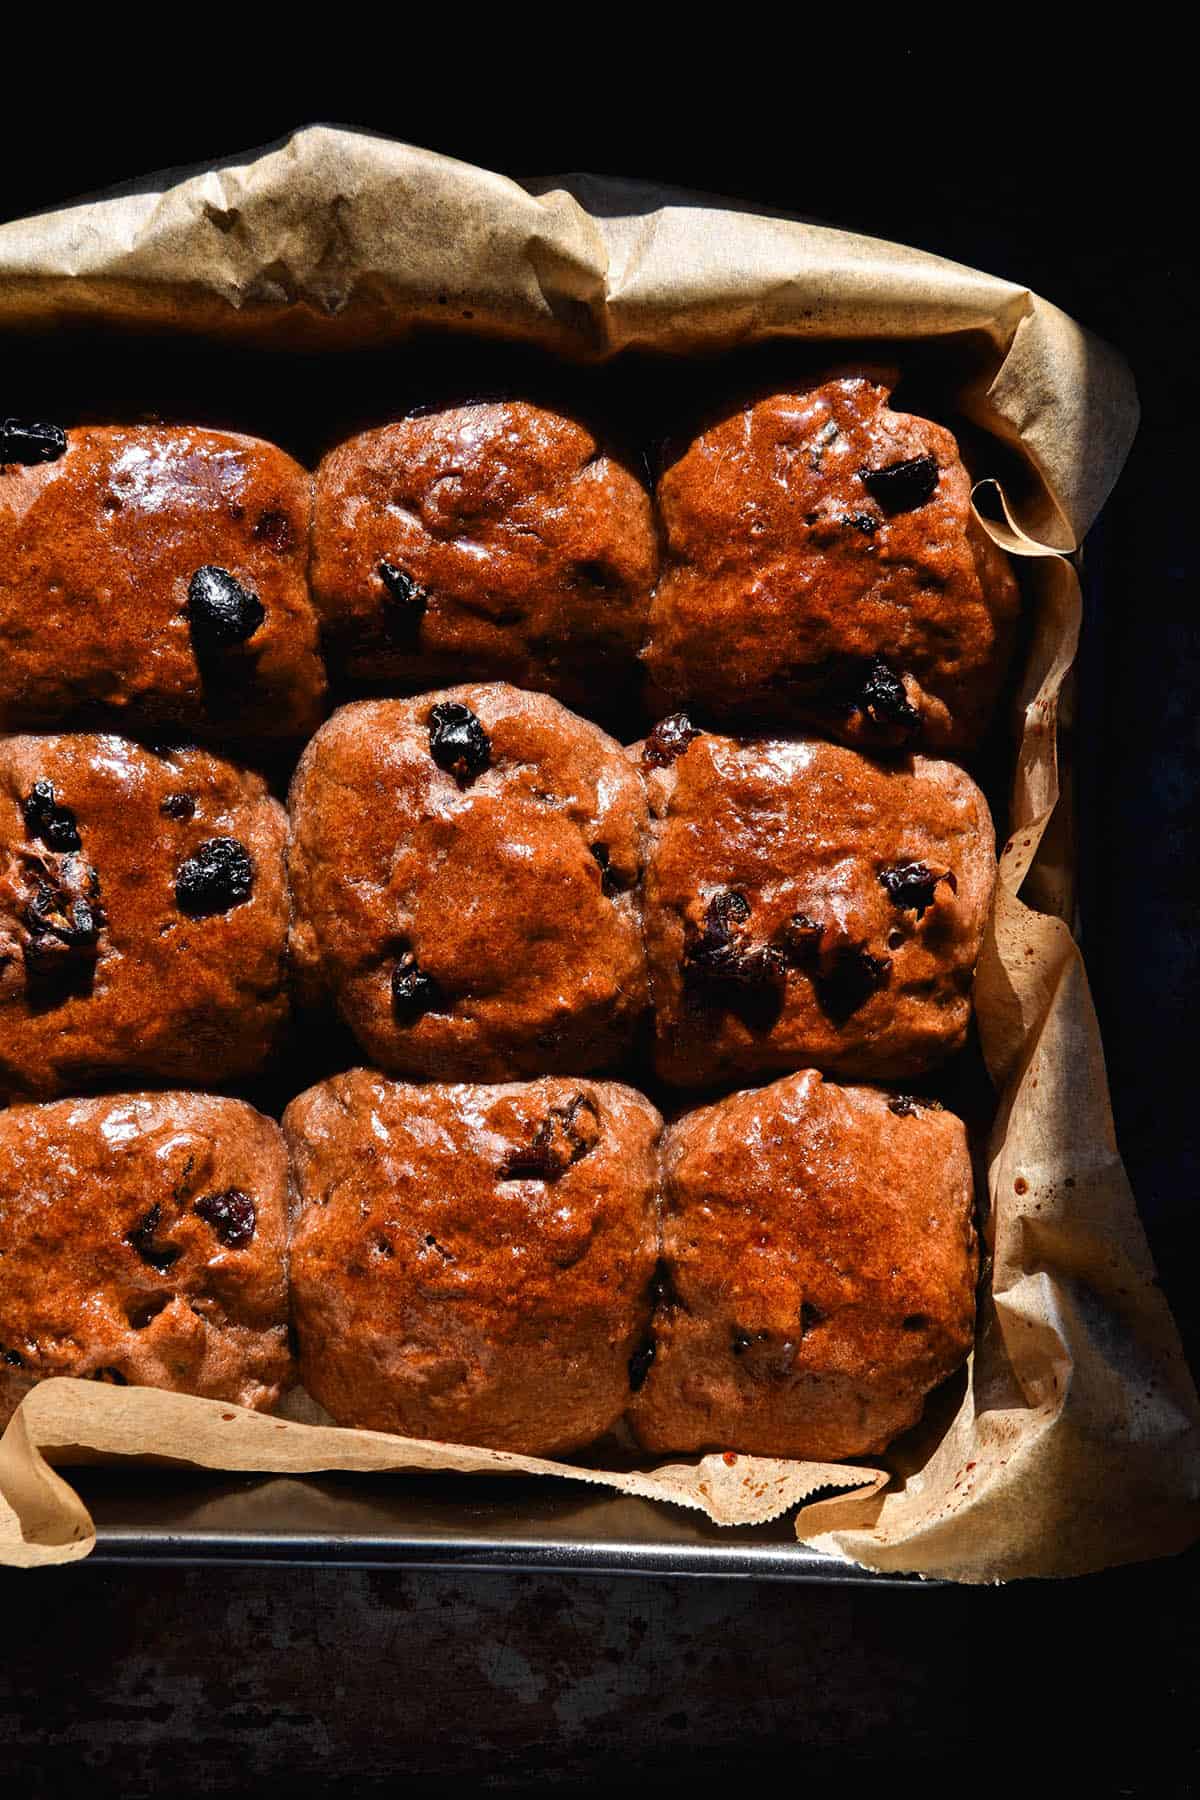 An aerial image of a tray of gluten free hot cross buns without yeast in bright sunlight against a dark backdrop